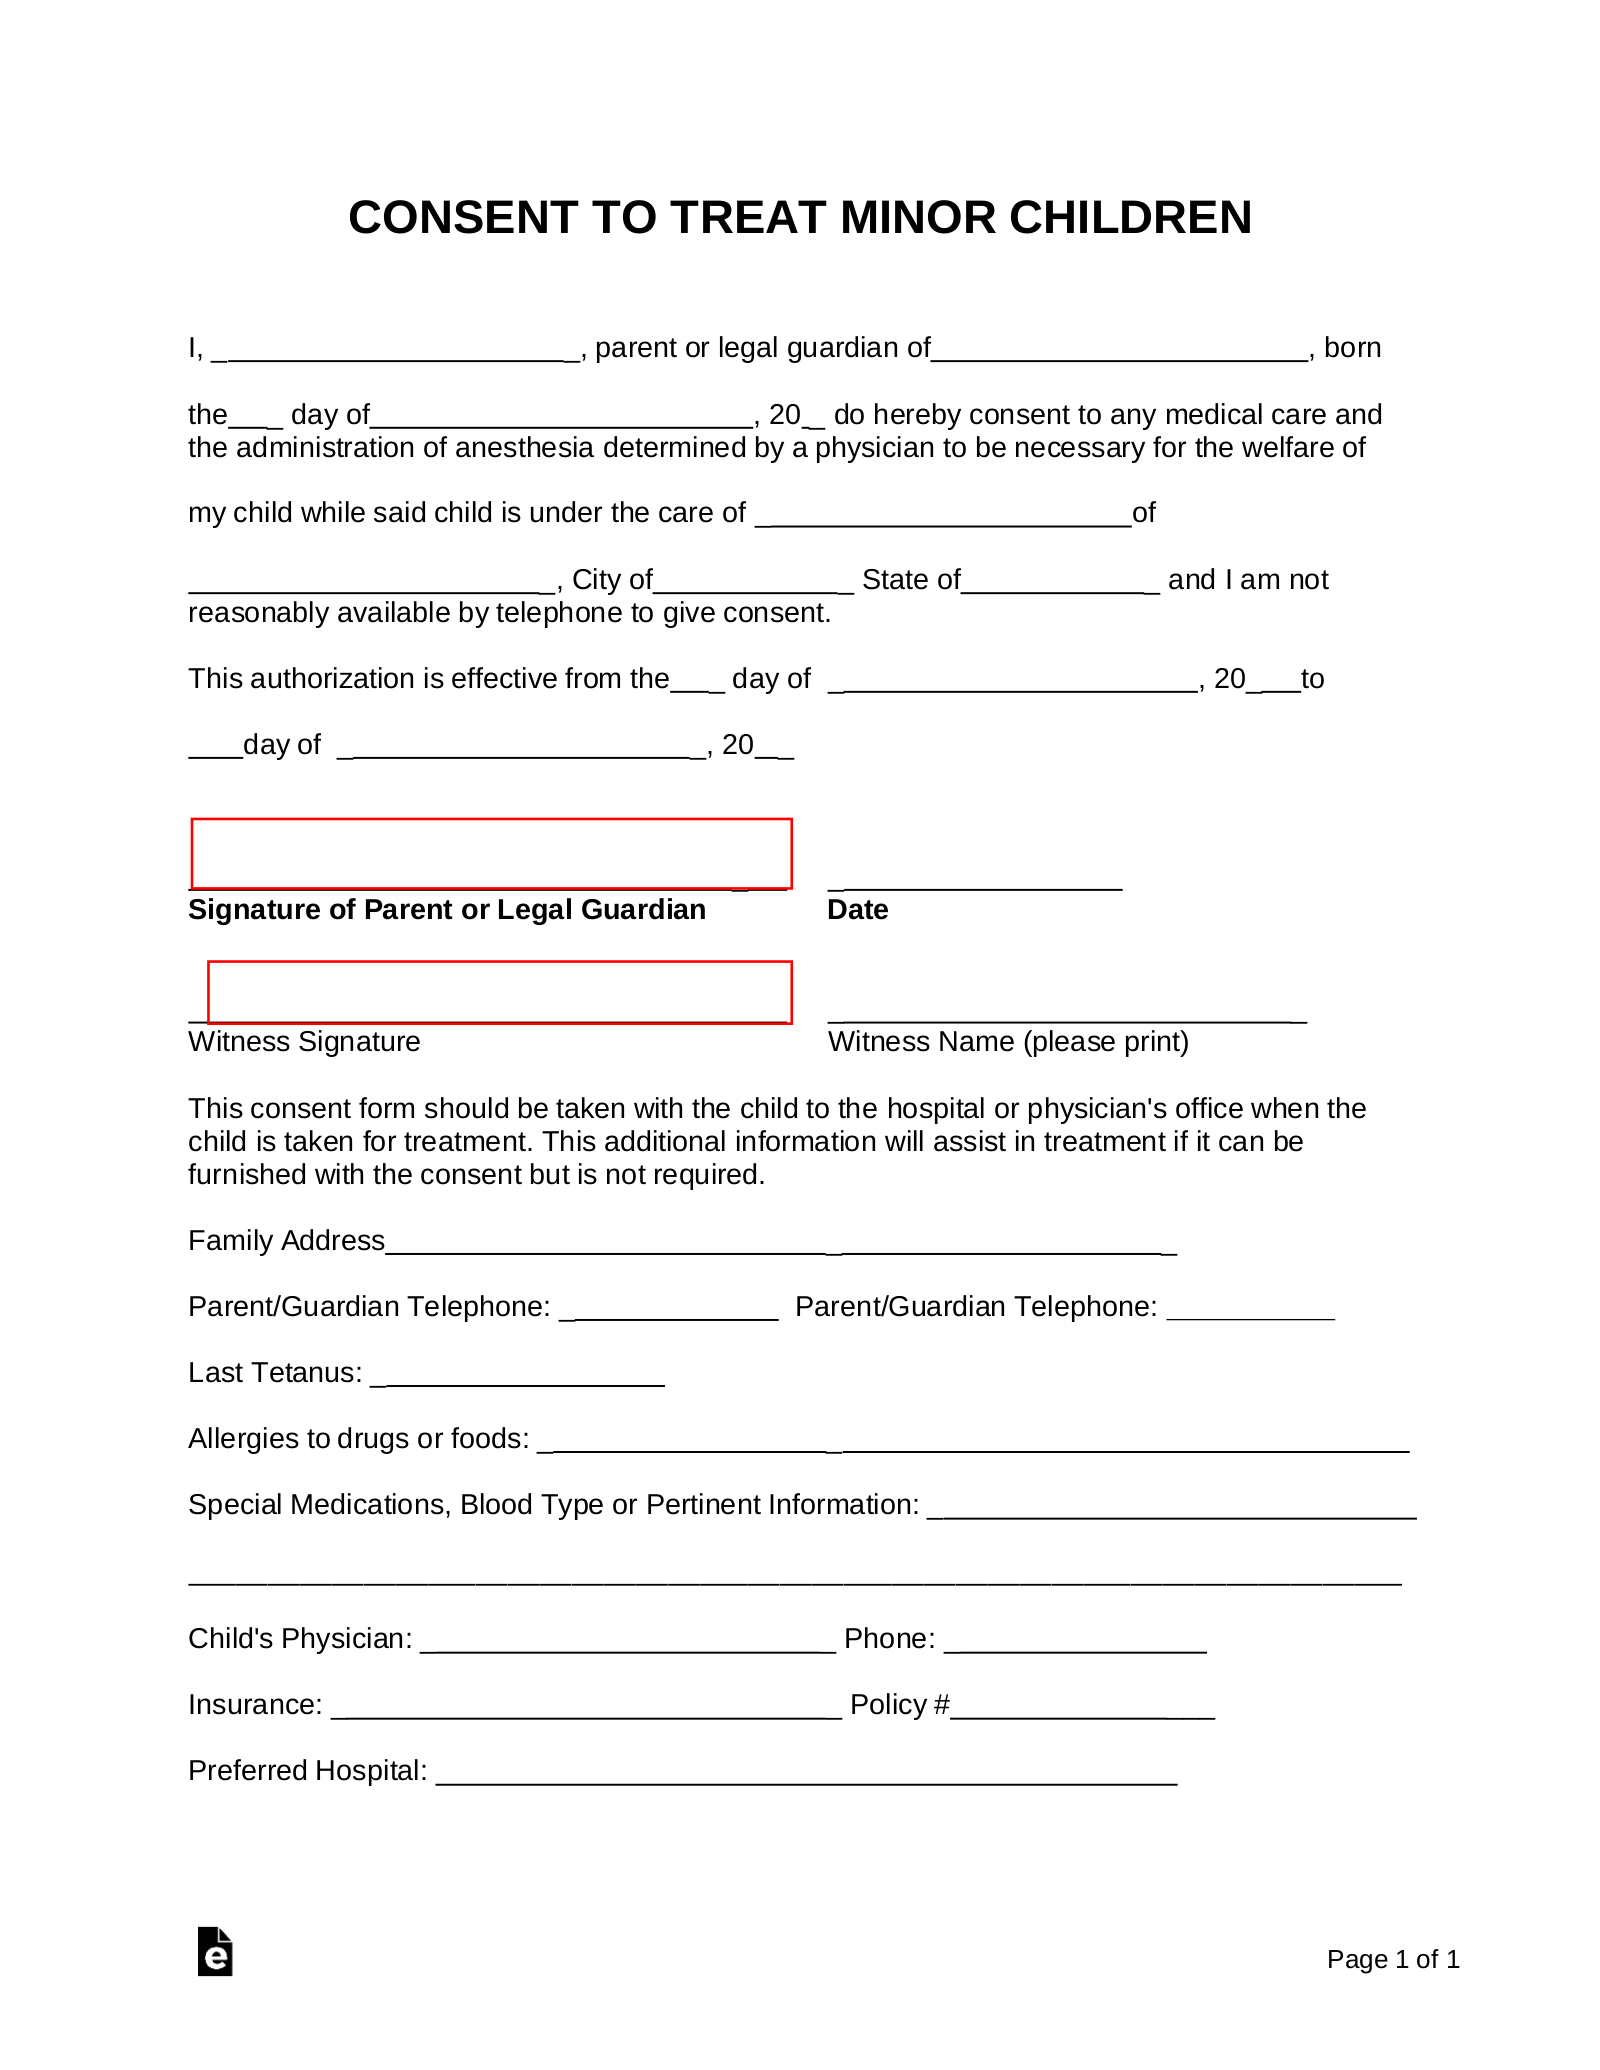 Letter Of Consent/ Medical Authorization Form from eforms.com